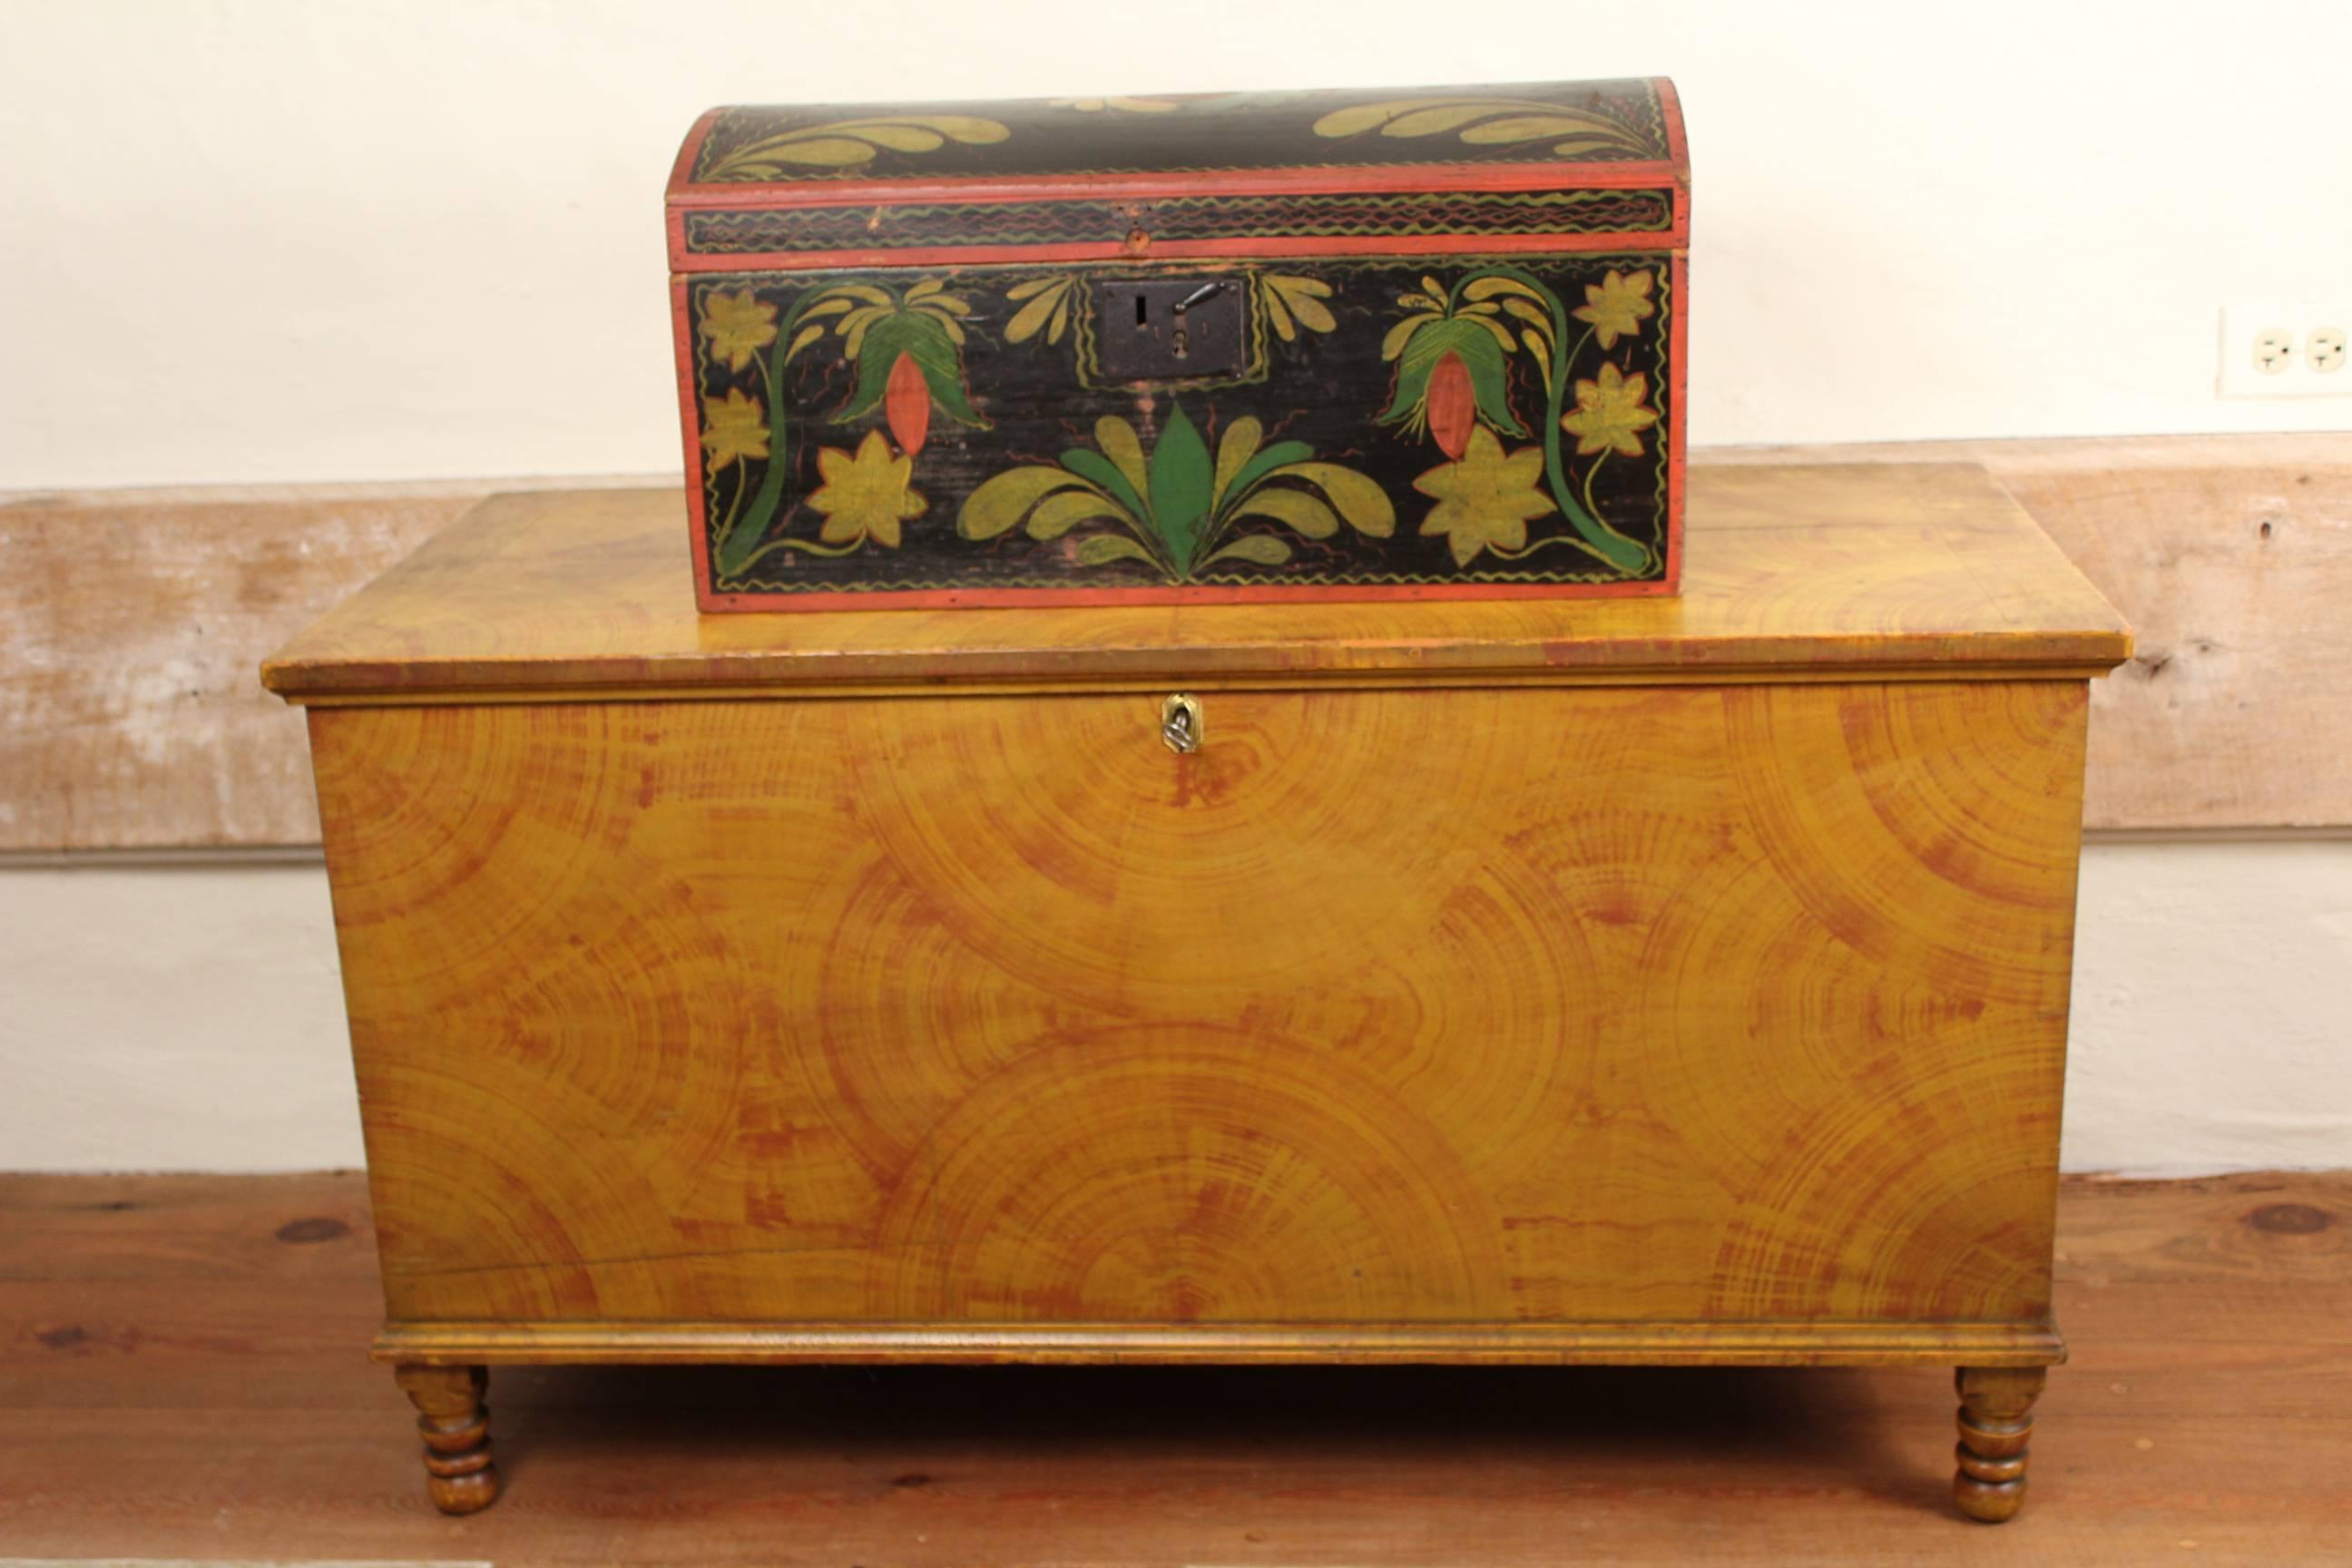 A Pennsylvania yellow-painted pine blanket chest featuring bold fan-shaped decoration over turned feet. Attributed to Jacob and Heinrich Blatt, Bern (now centre) Township, Berks County, Pennsylvania and signed and dated 1841 with further indistinct